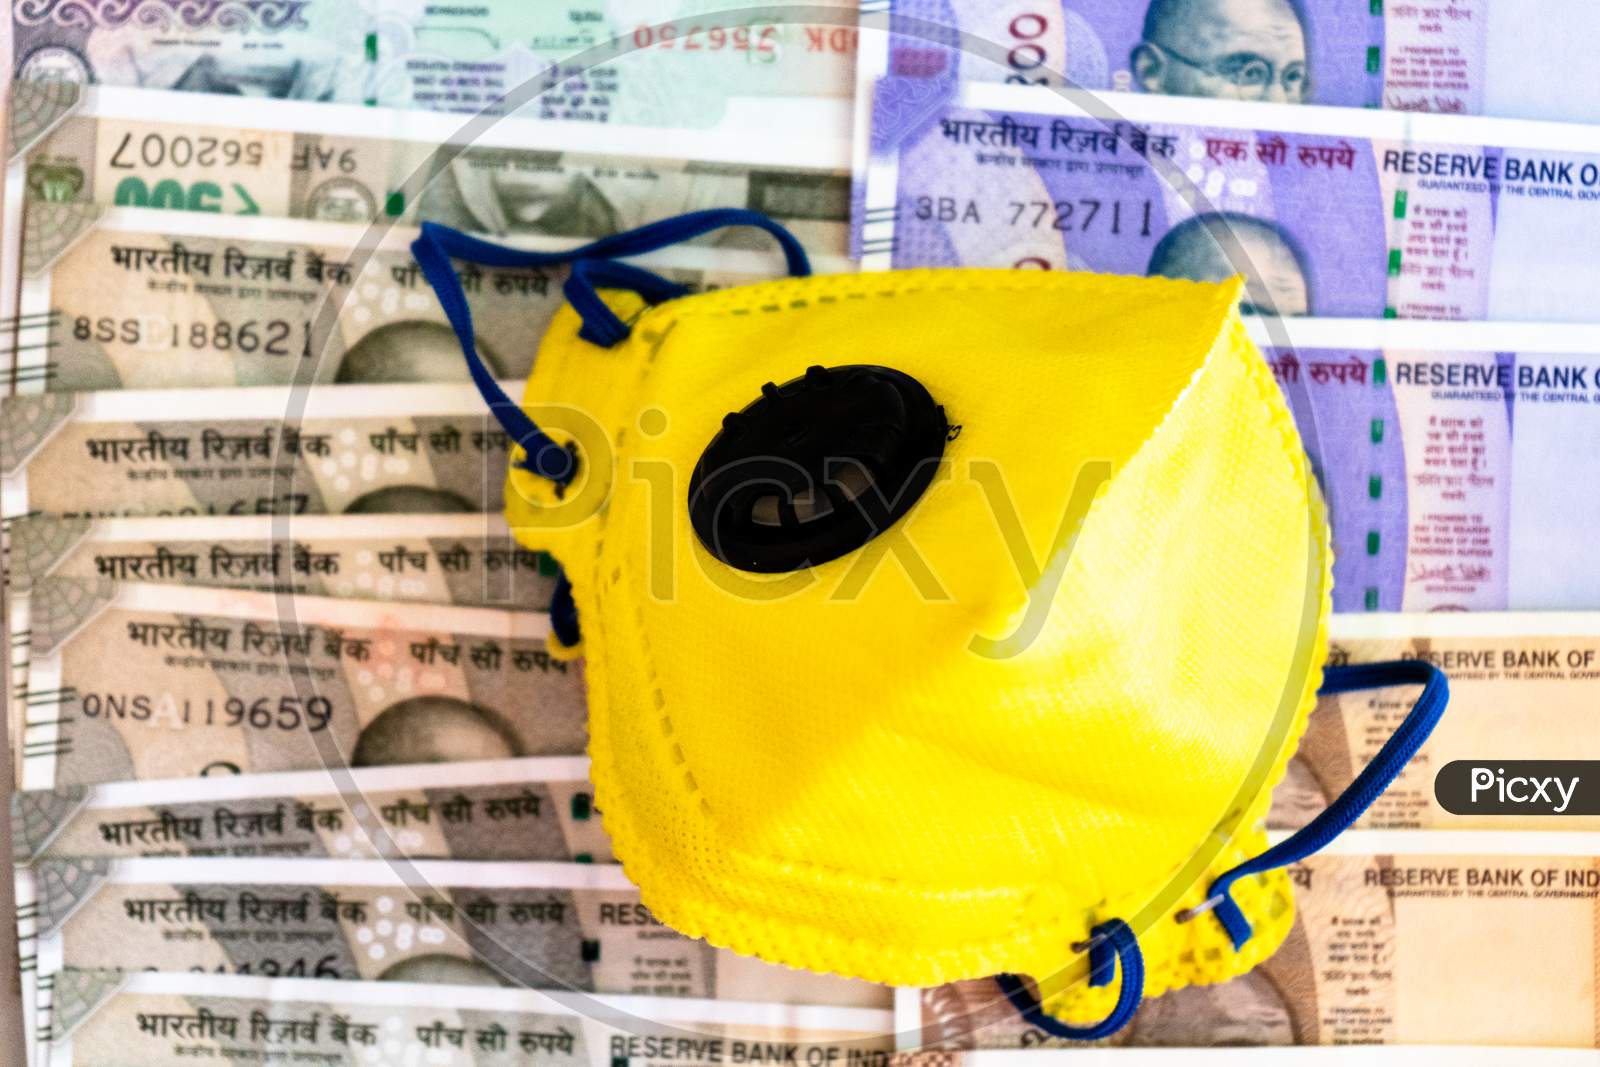 Safety And Business Essentials Yellow Mask And Sanitizer Placed On Bed Of Indian Currency